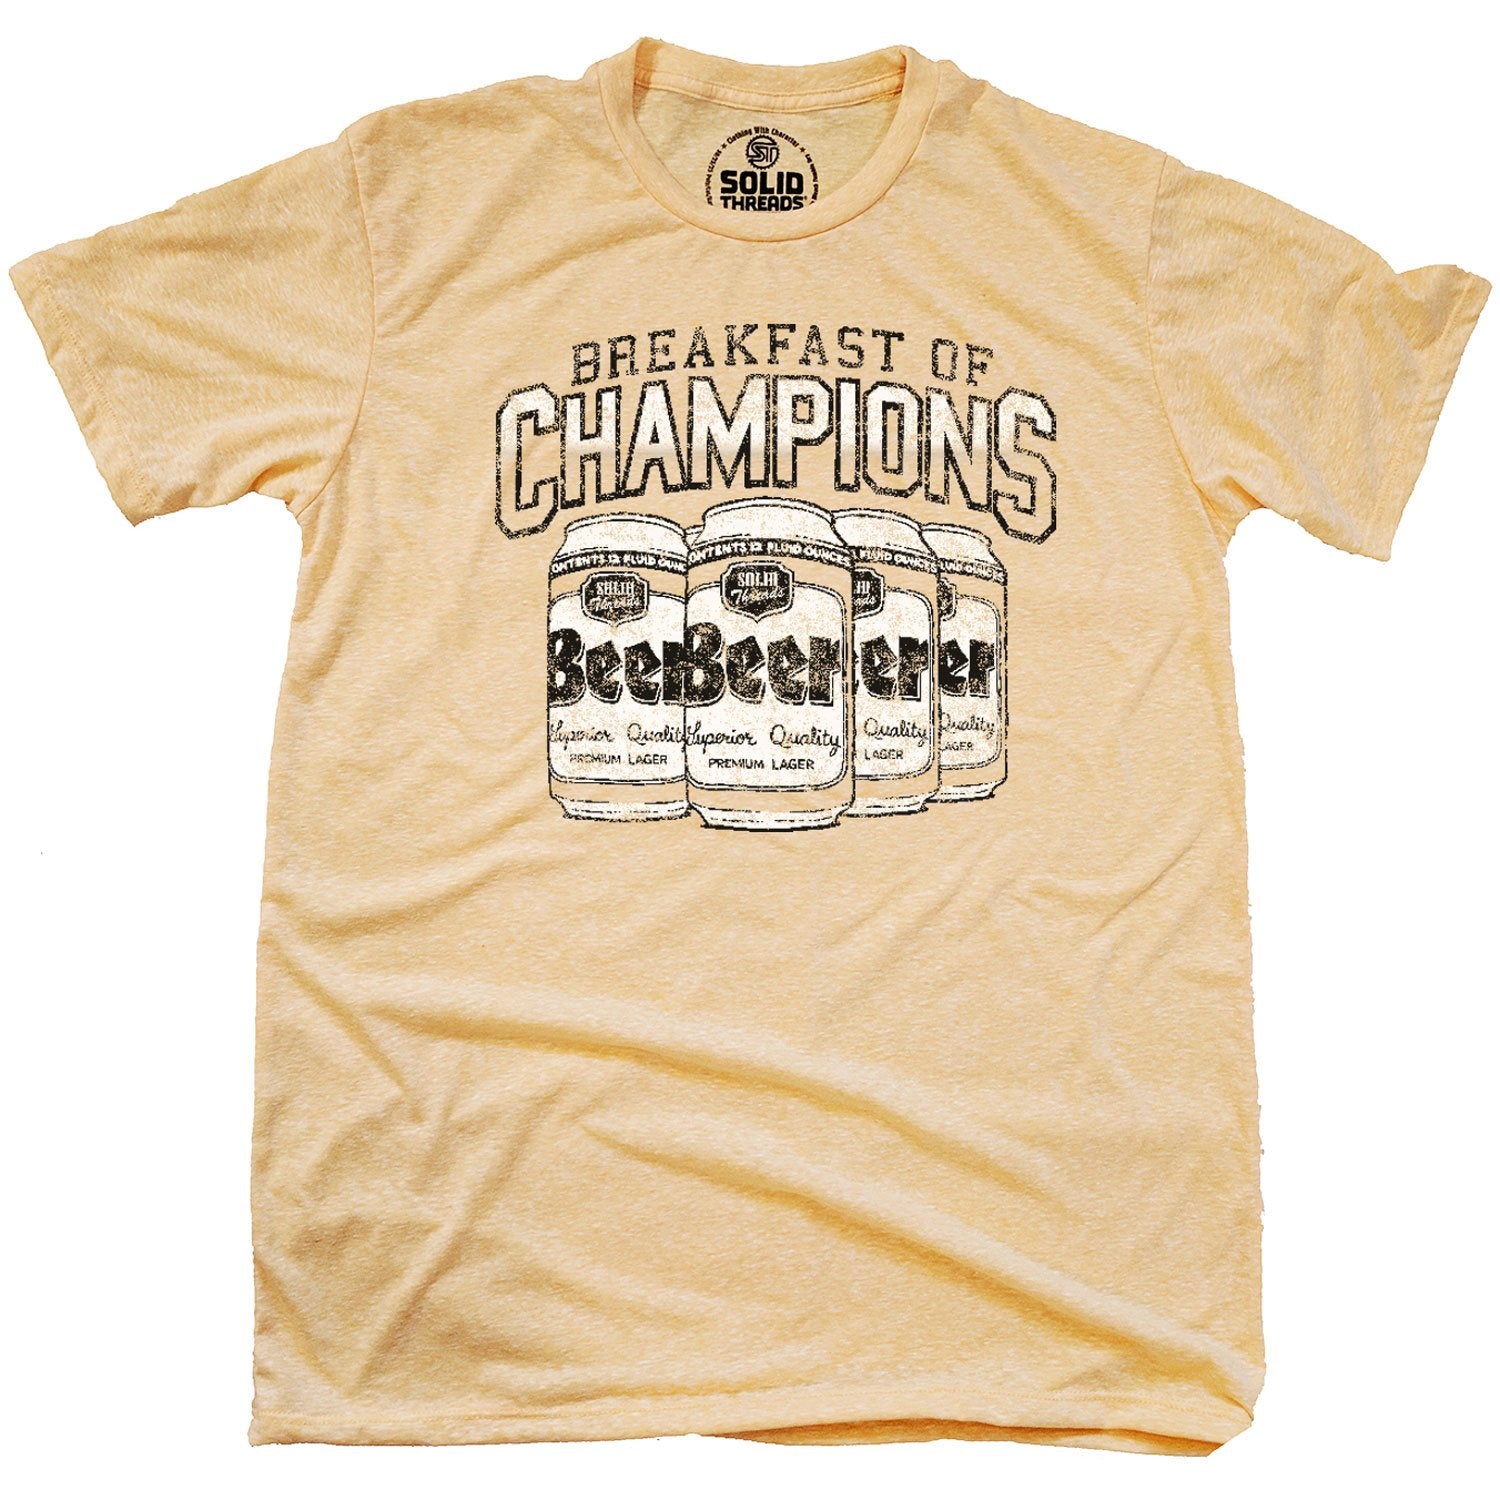 Men's Breakfast Of Champions Green Graphic T-Shirt | Funny Triblend Tee on Model | Solid Threads